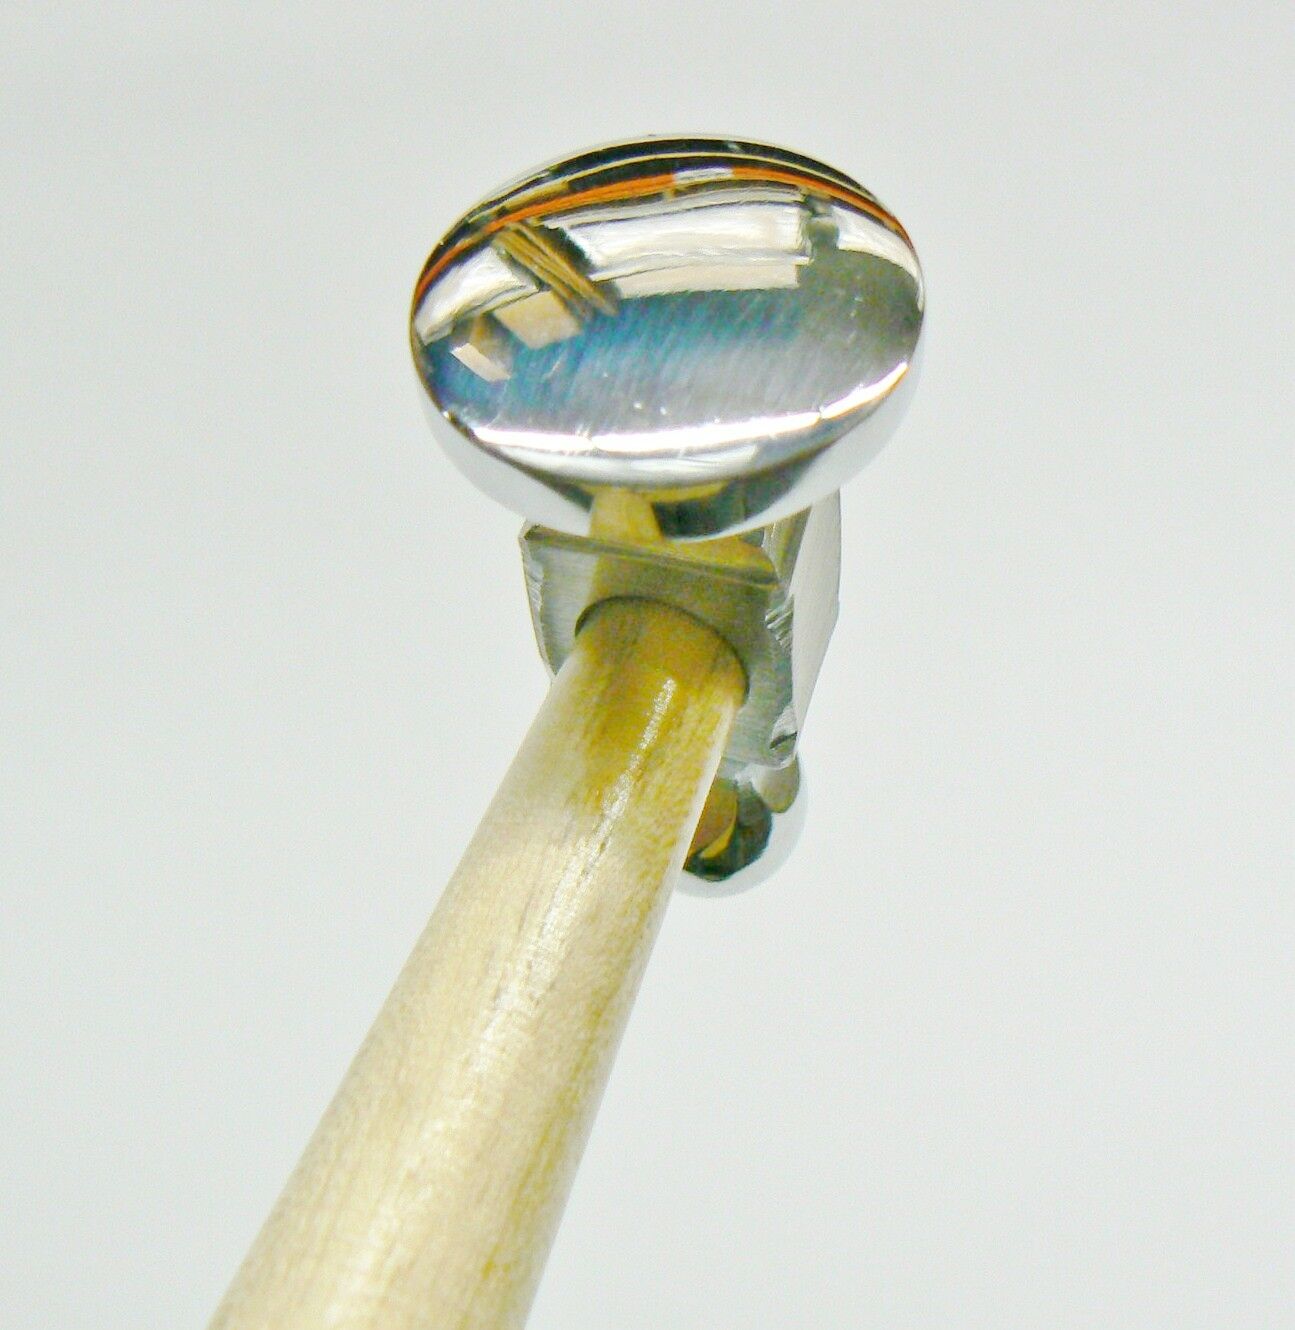 Jewelers Chasing Hammers Jewelry Metalwork Domed Hammer 1" - 25mm Bowed Face